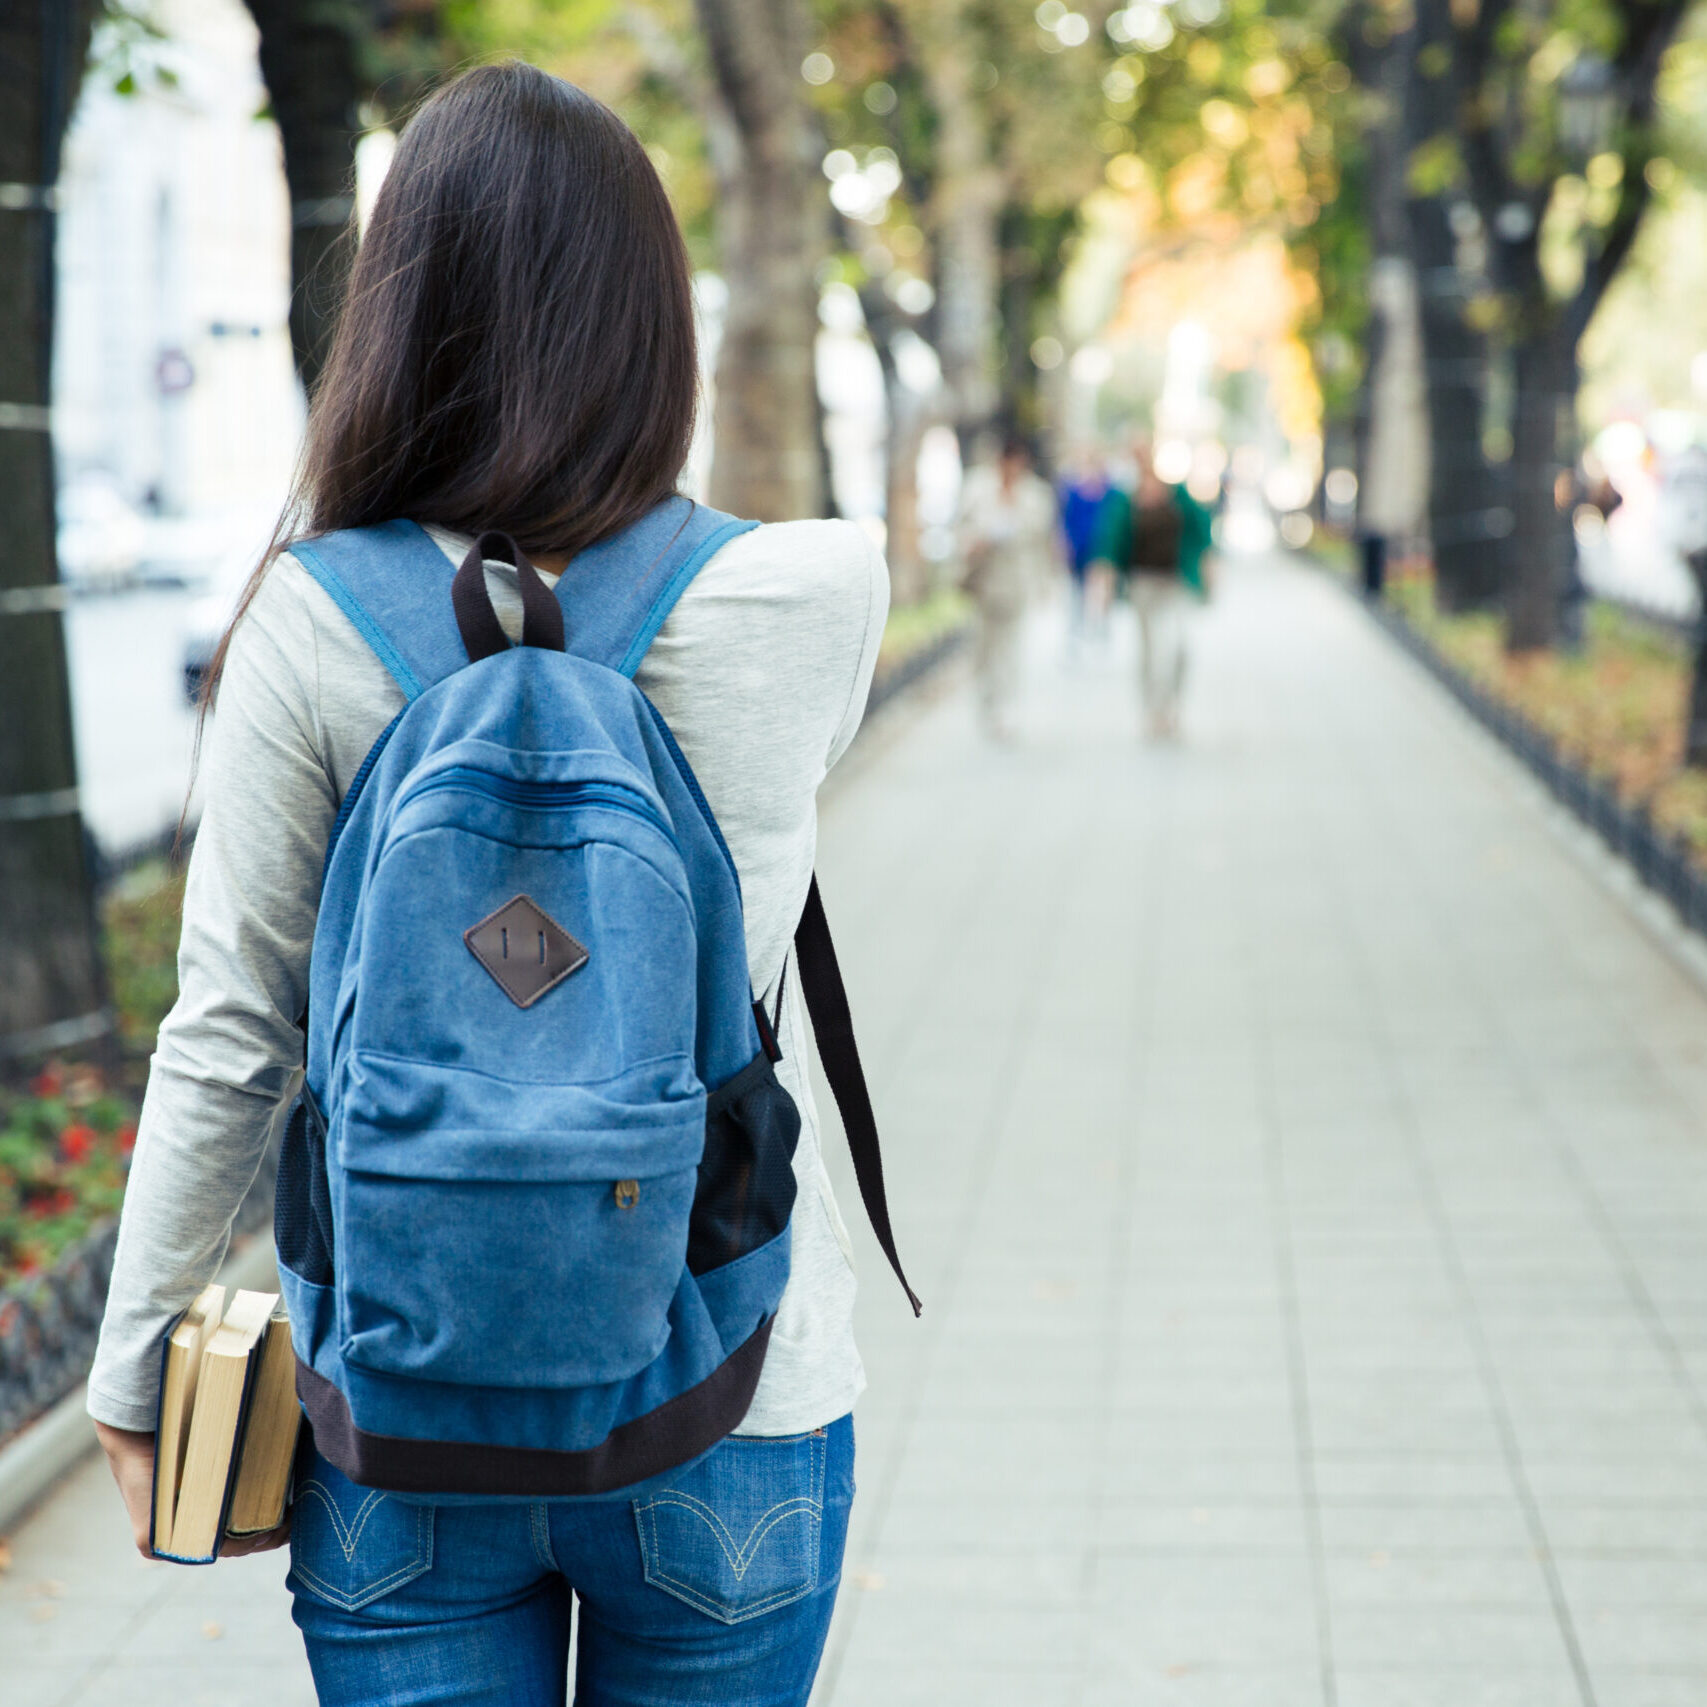 Back view portrait of a female student walking in the city park outdoors